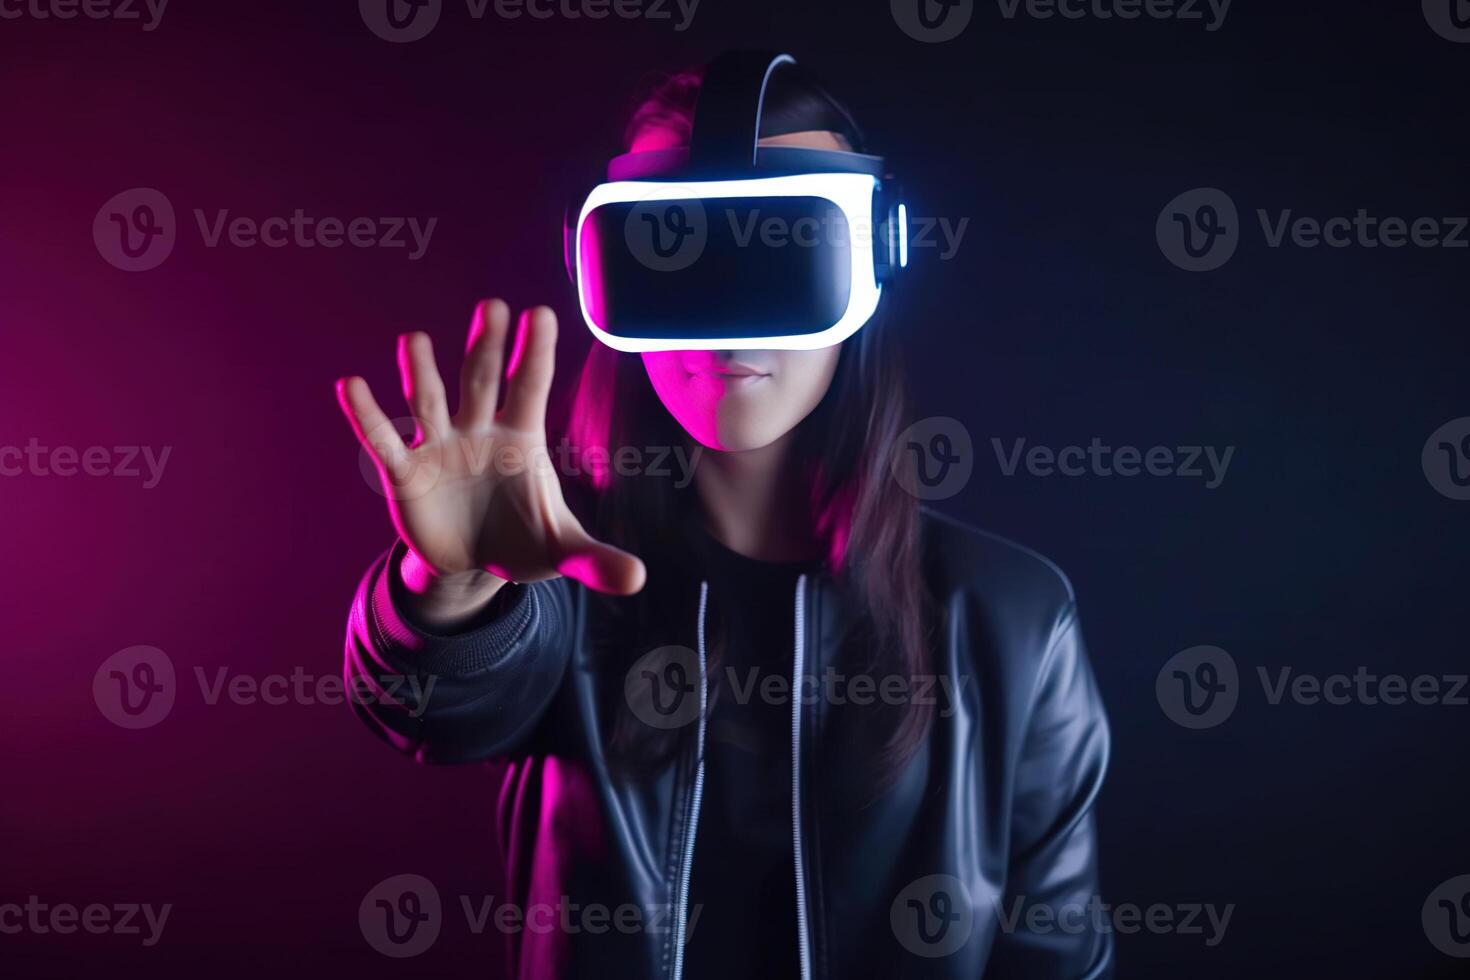 https://static.vecteezy.com/system/resources/previews/022/864/260/non_2x/a-woman-wearing-a-virtual-reality-headset-touching-the-virtual-object-on-dark-background-ai-generated-photo.jpg